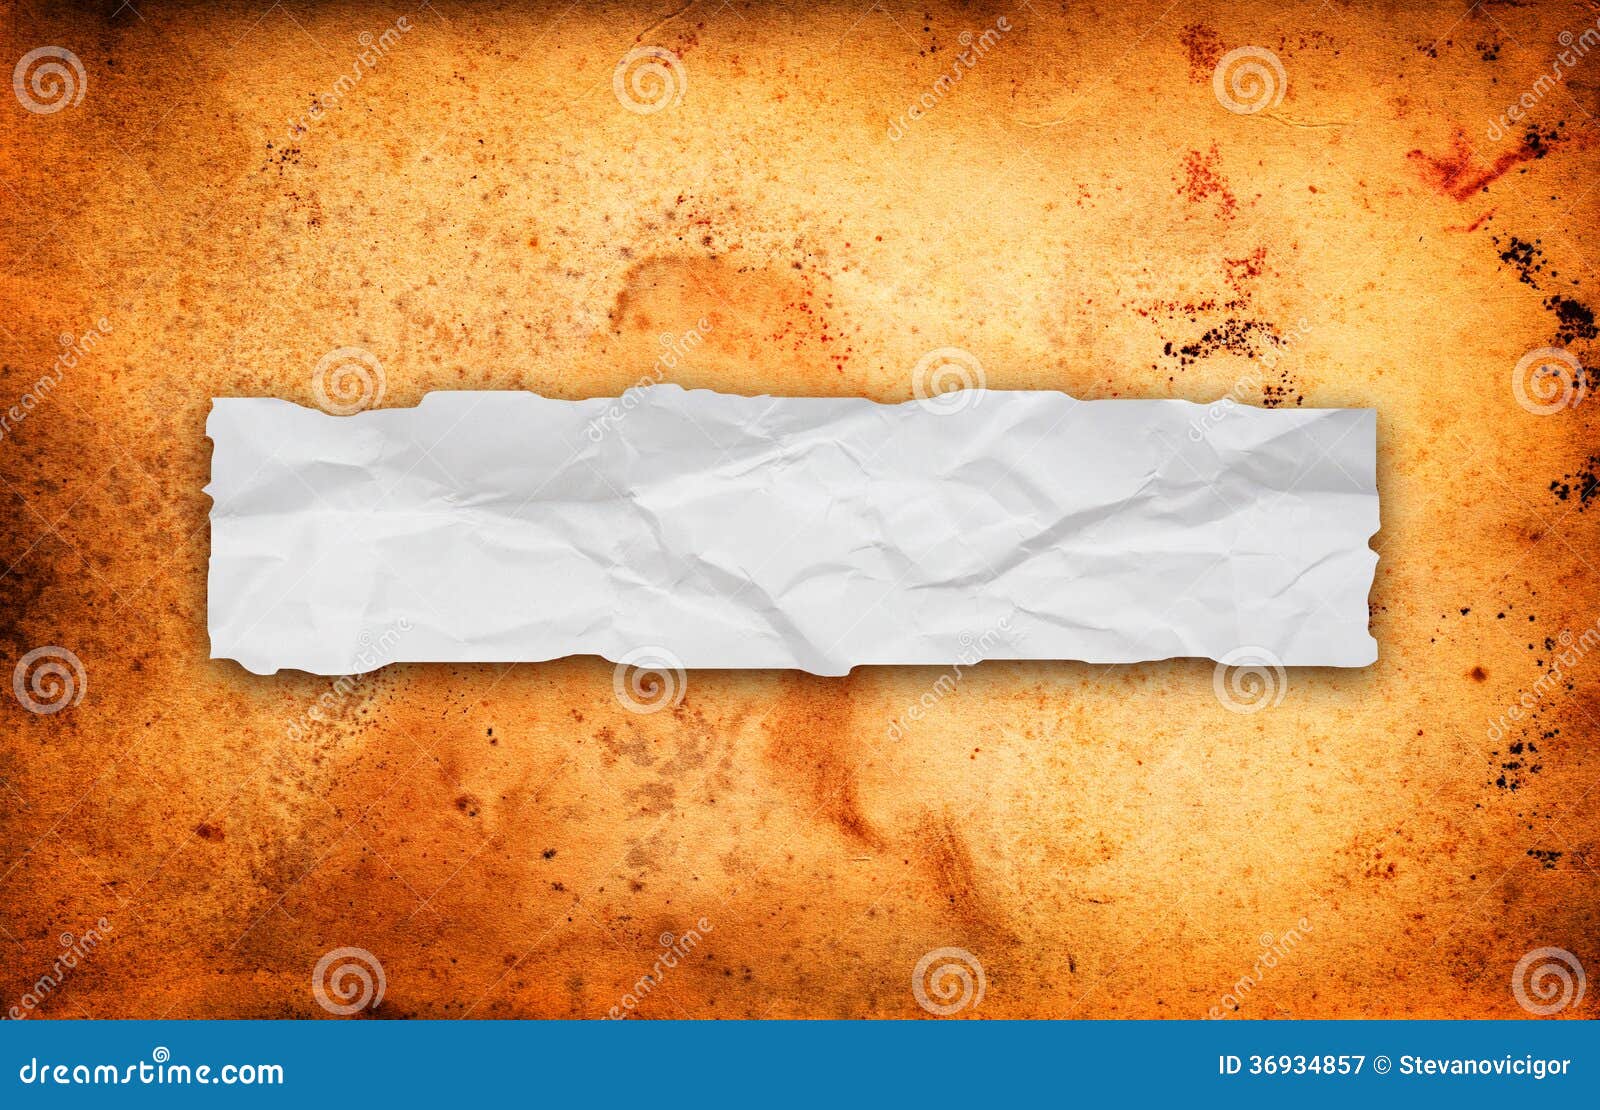 Torn paper as background stock image. Image of paper - 36934857